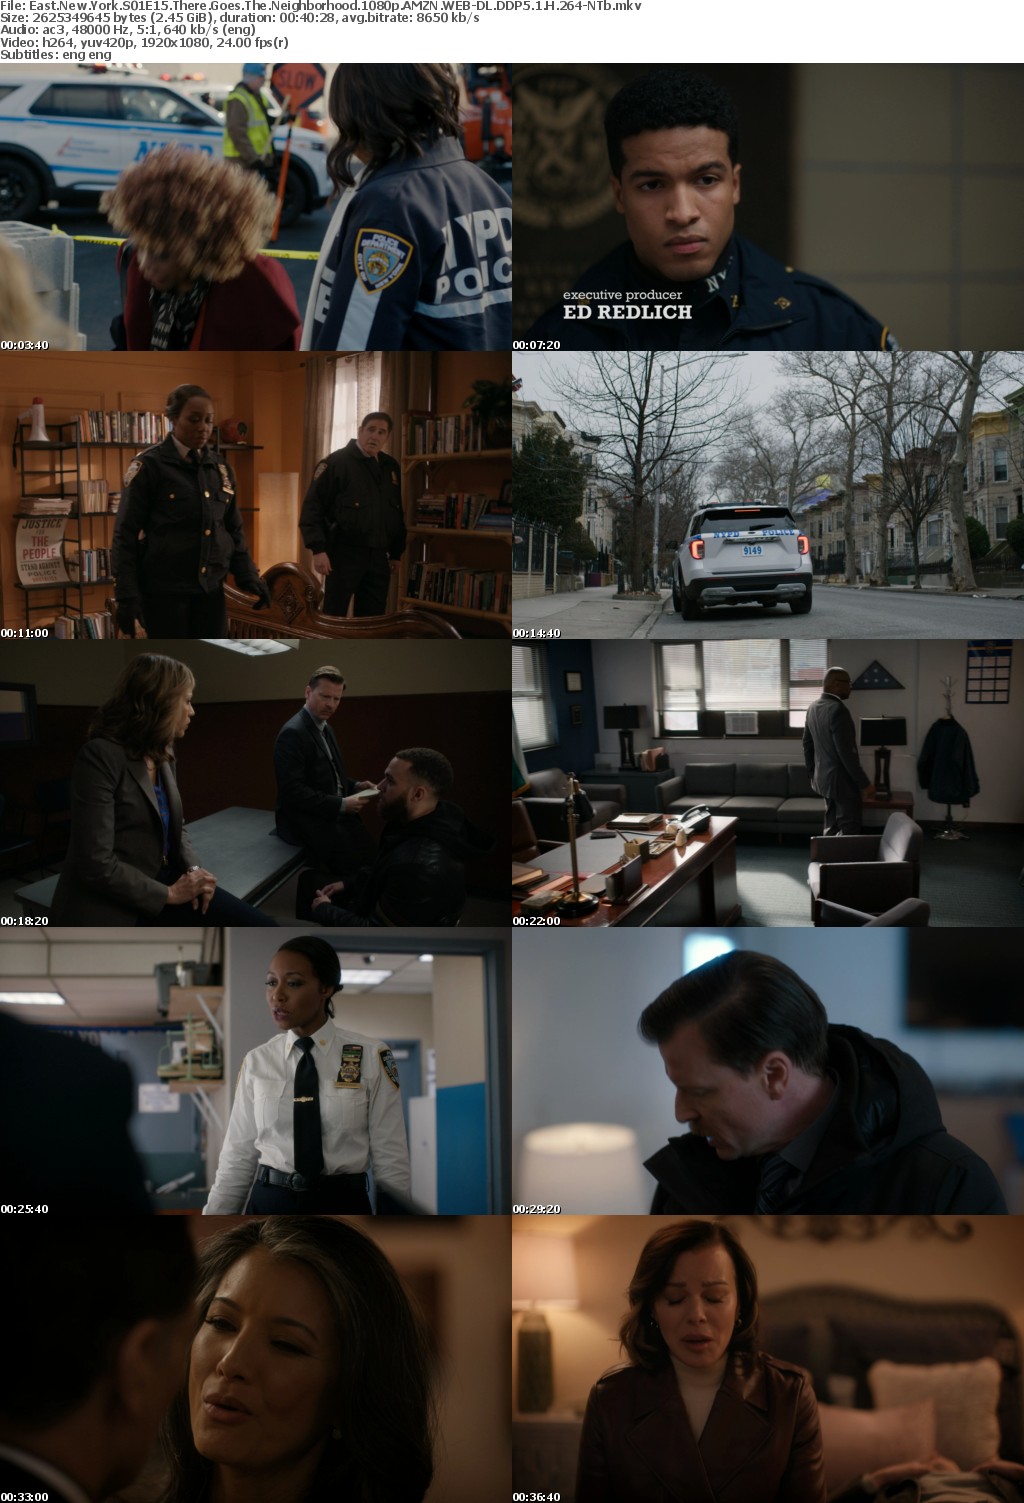 East New York S01E15 There Goes The Neighborhood 1080p AMZN WEBRip DDP5 1 x264-NTb